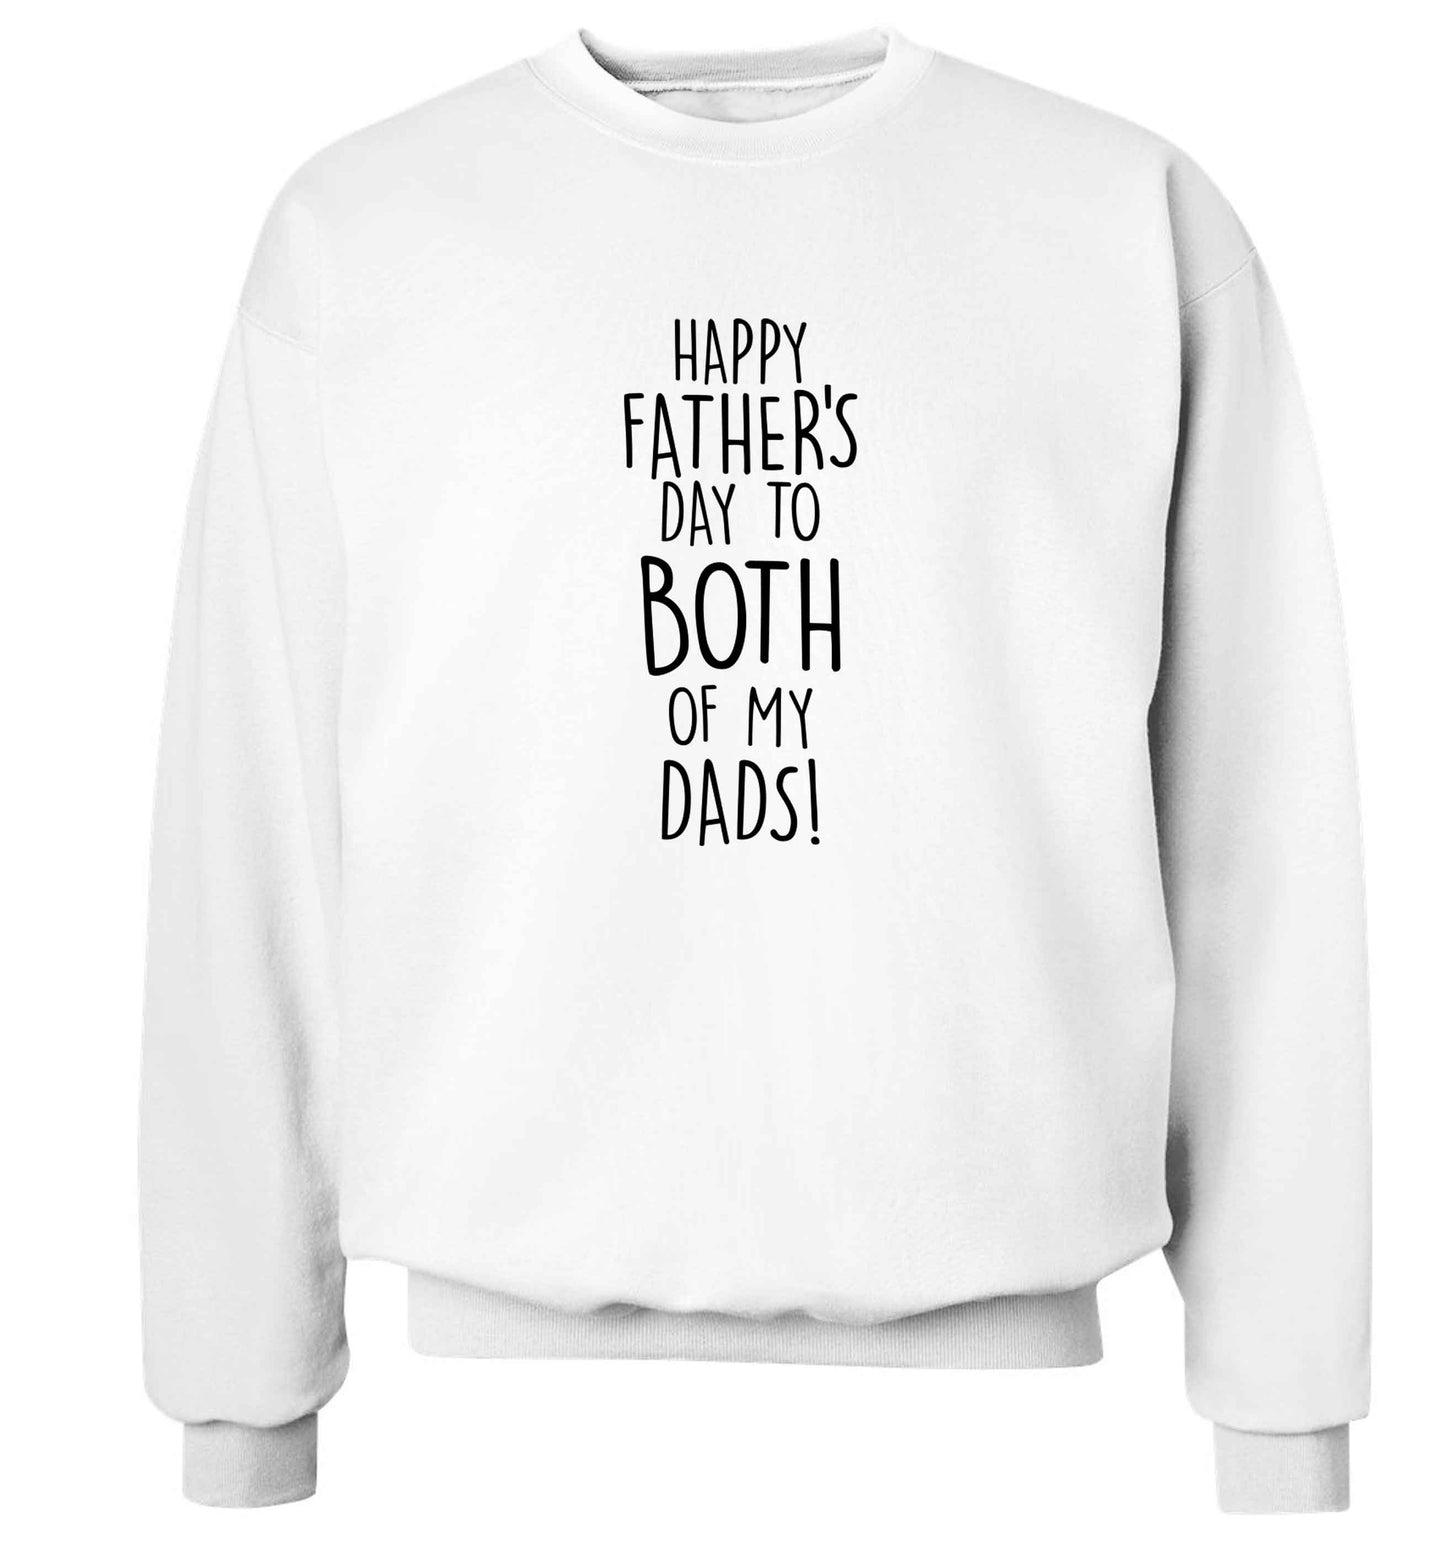 Happy Father's day to both of my dads adult's unisex white sweater 2XL